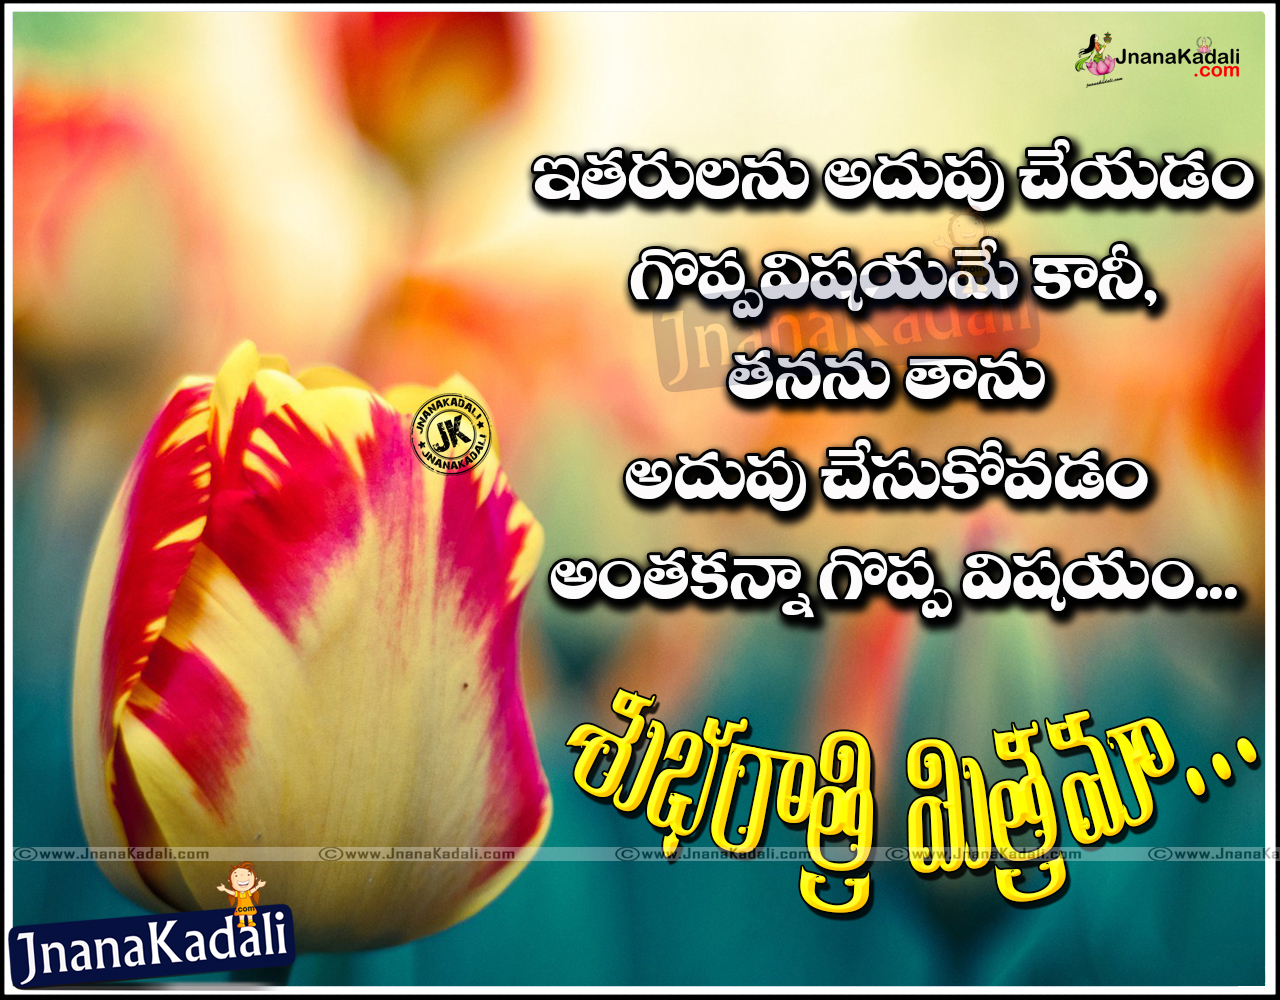 Telugu Good Night Quotes with lessons learned in life | JNANA ...